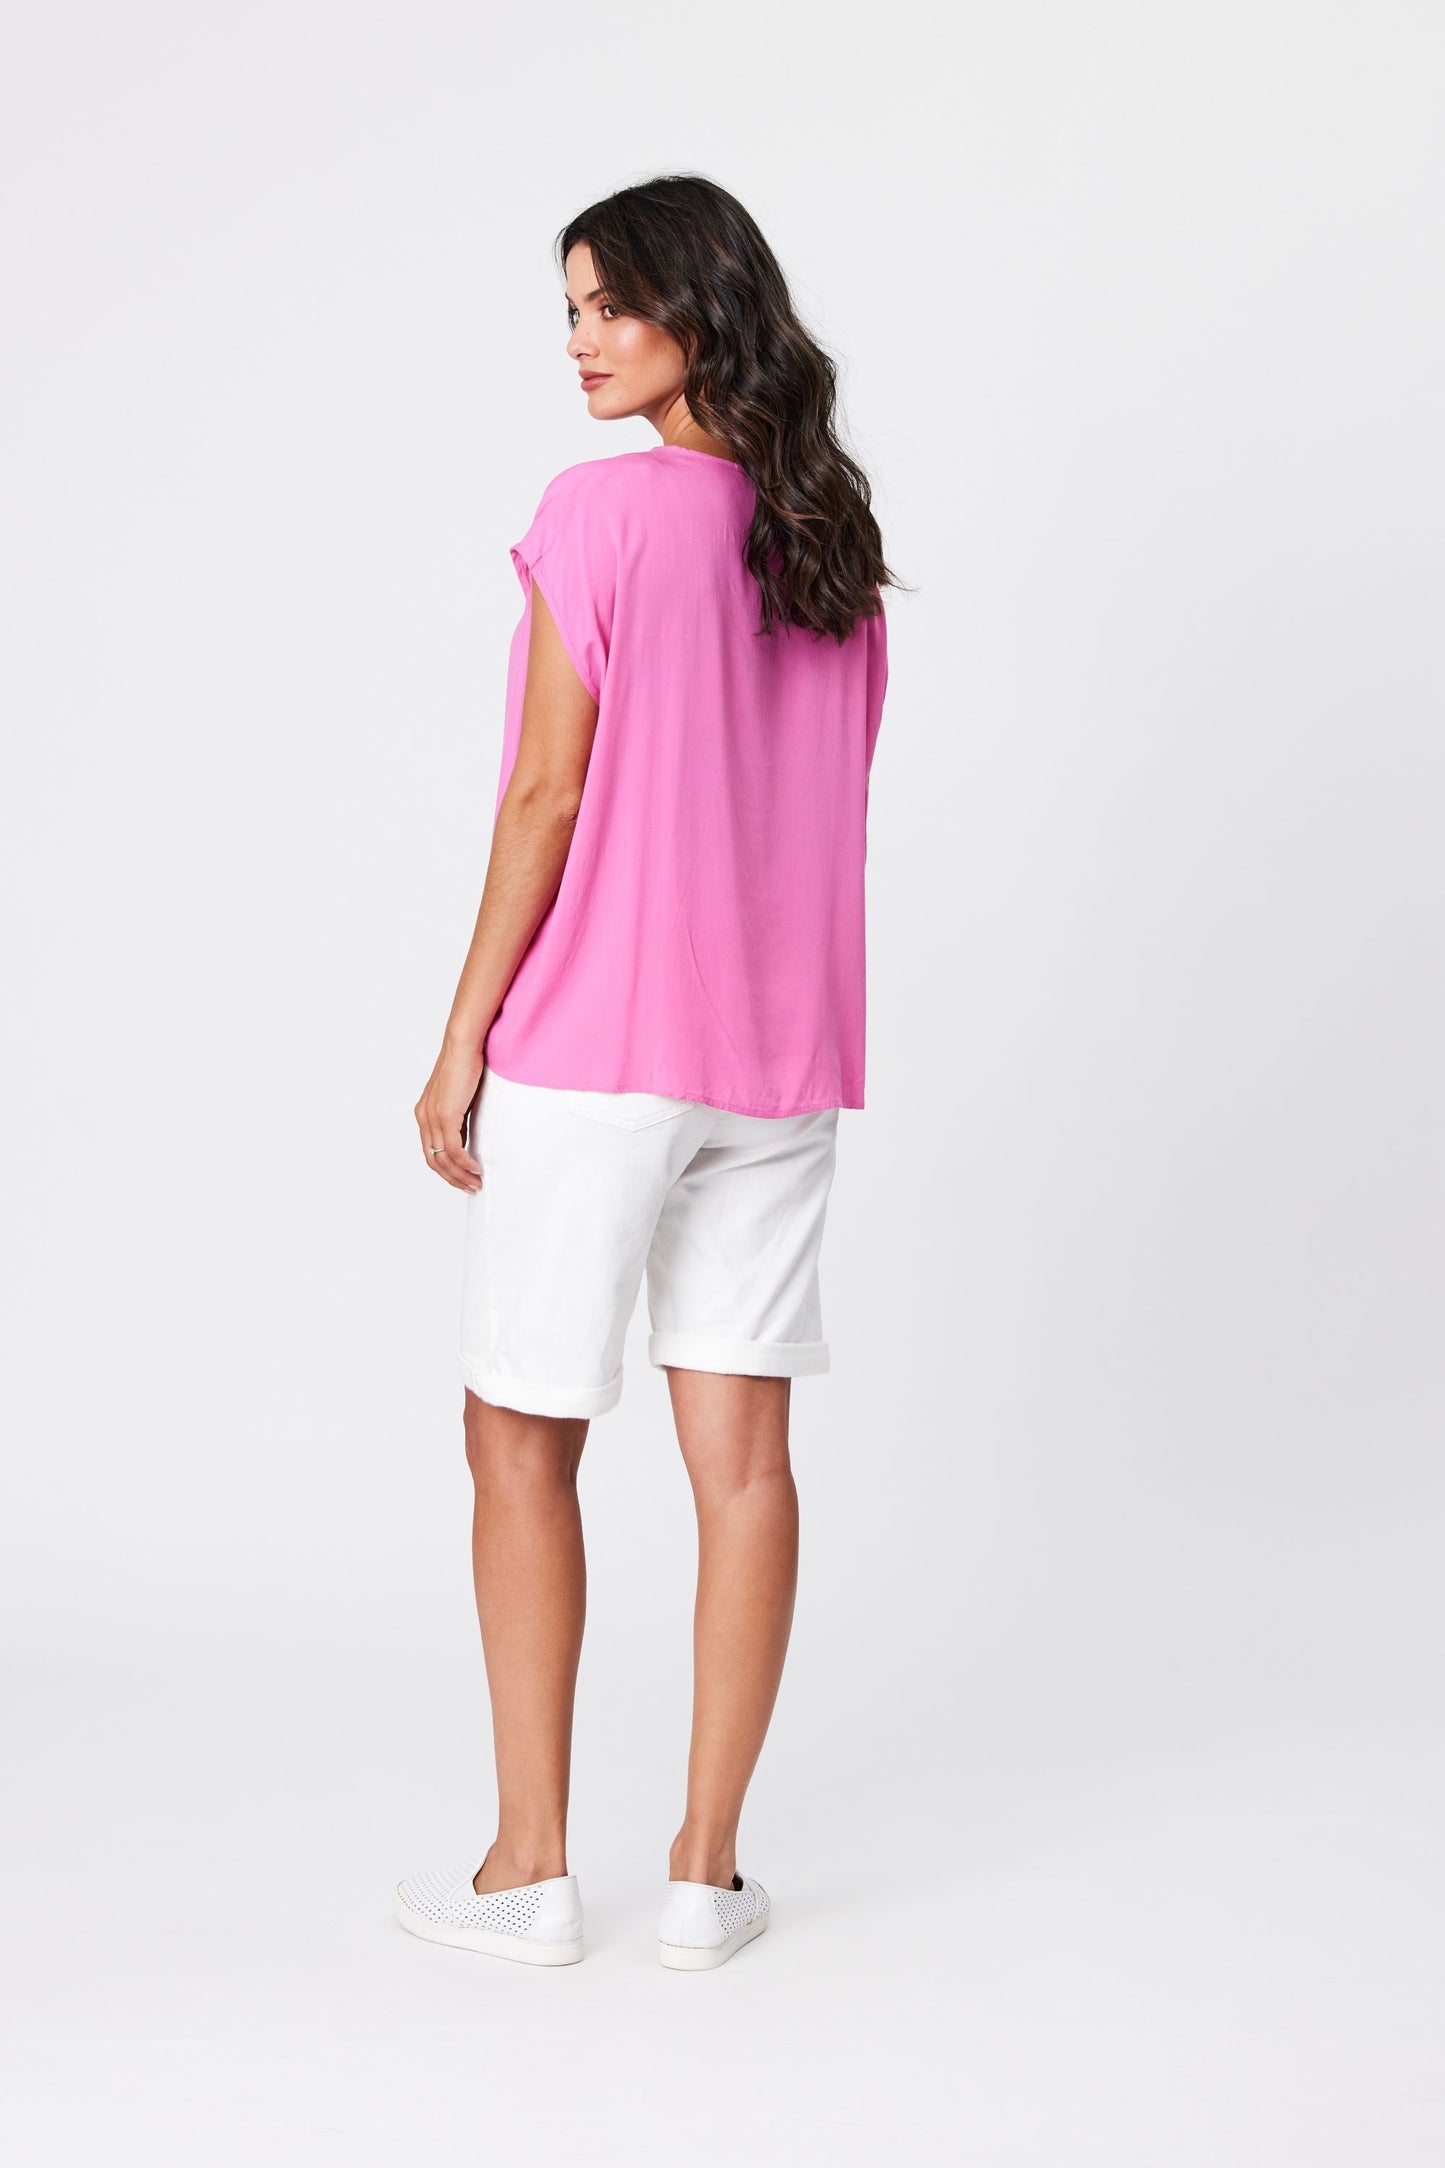 Classified - Amalfi Check Heart Top - C3008 - Pink - 70% OFF